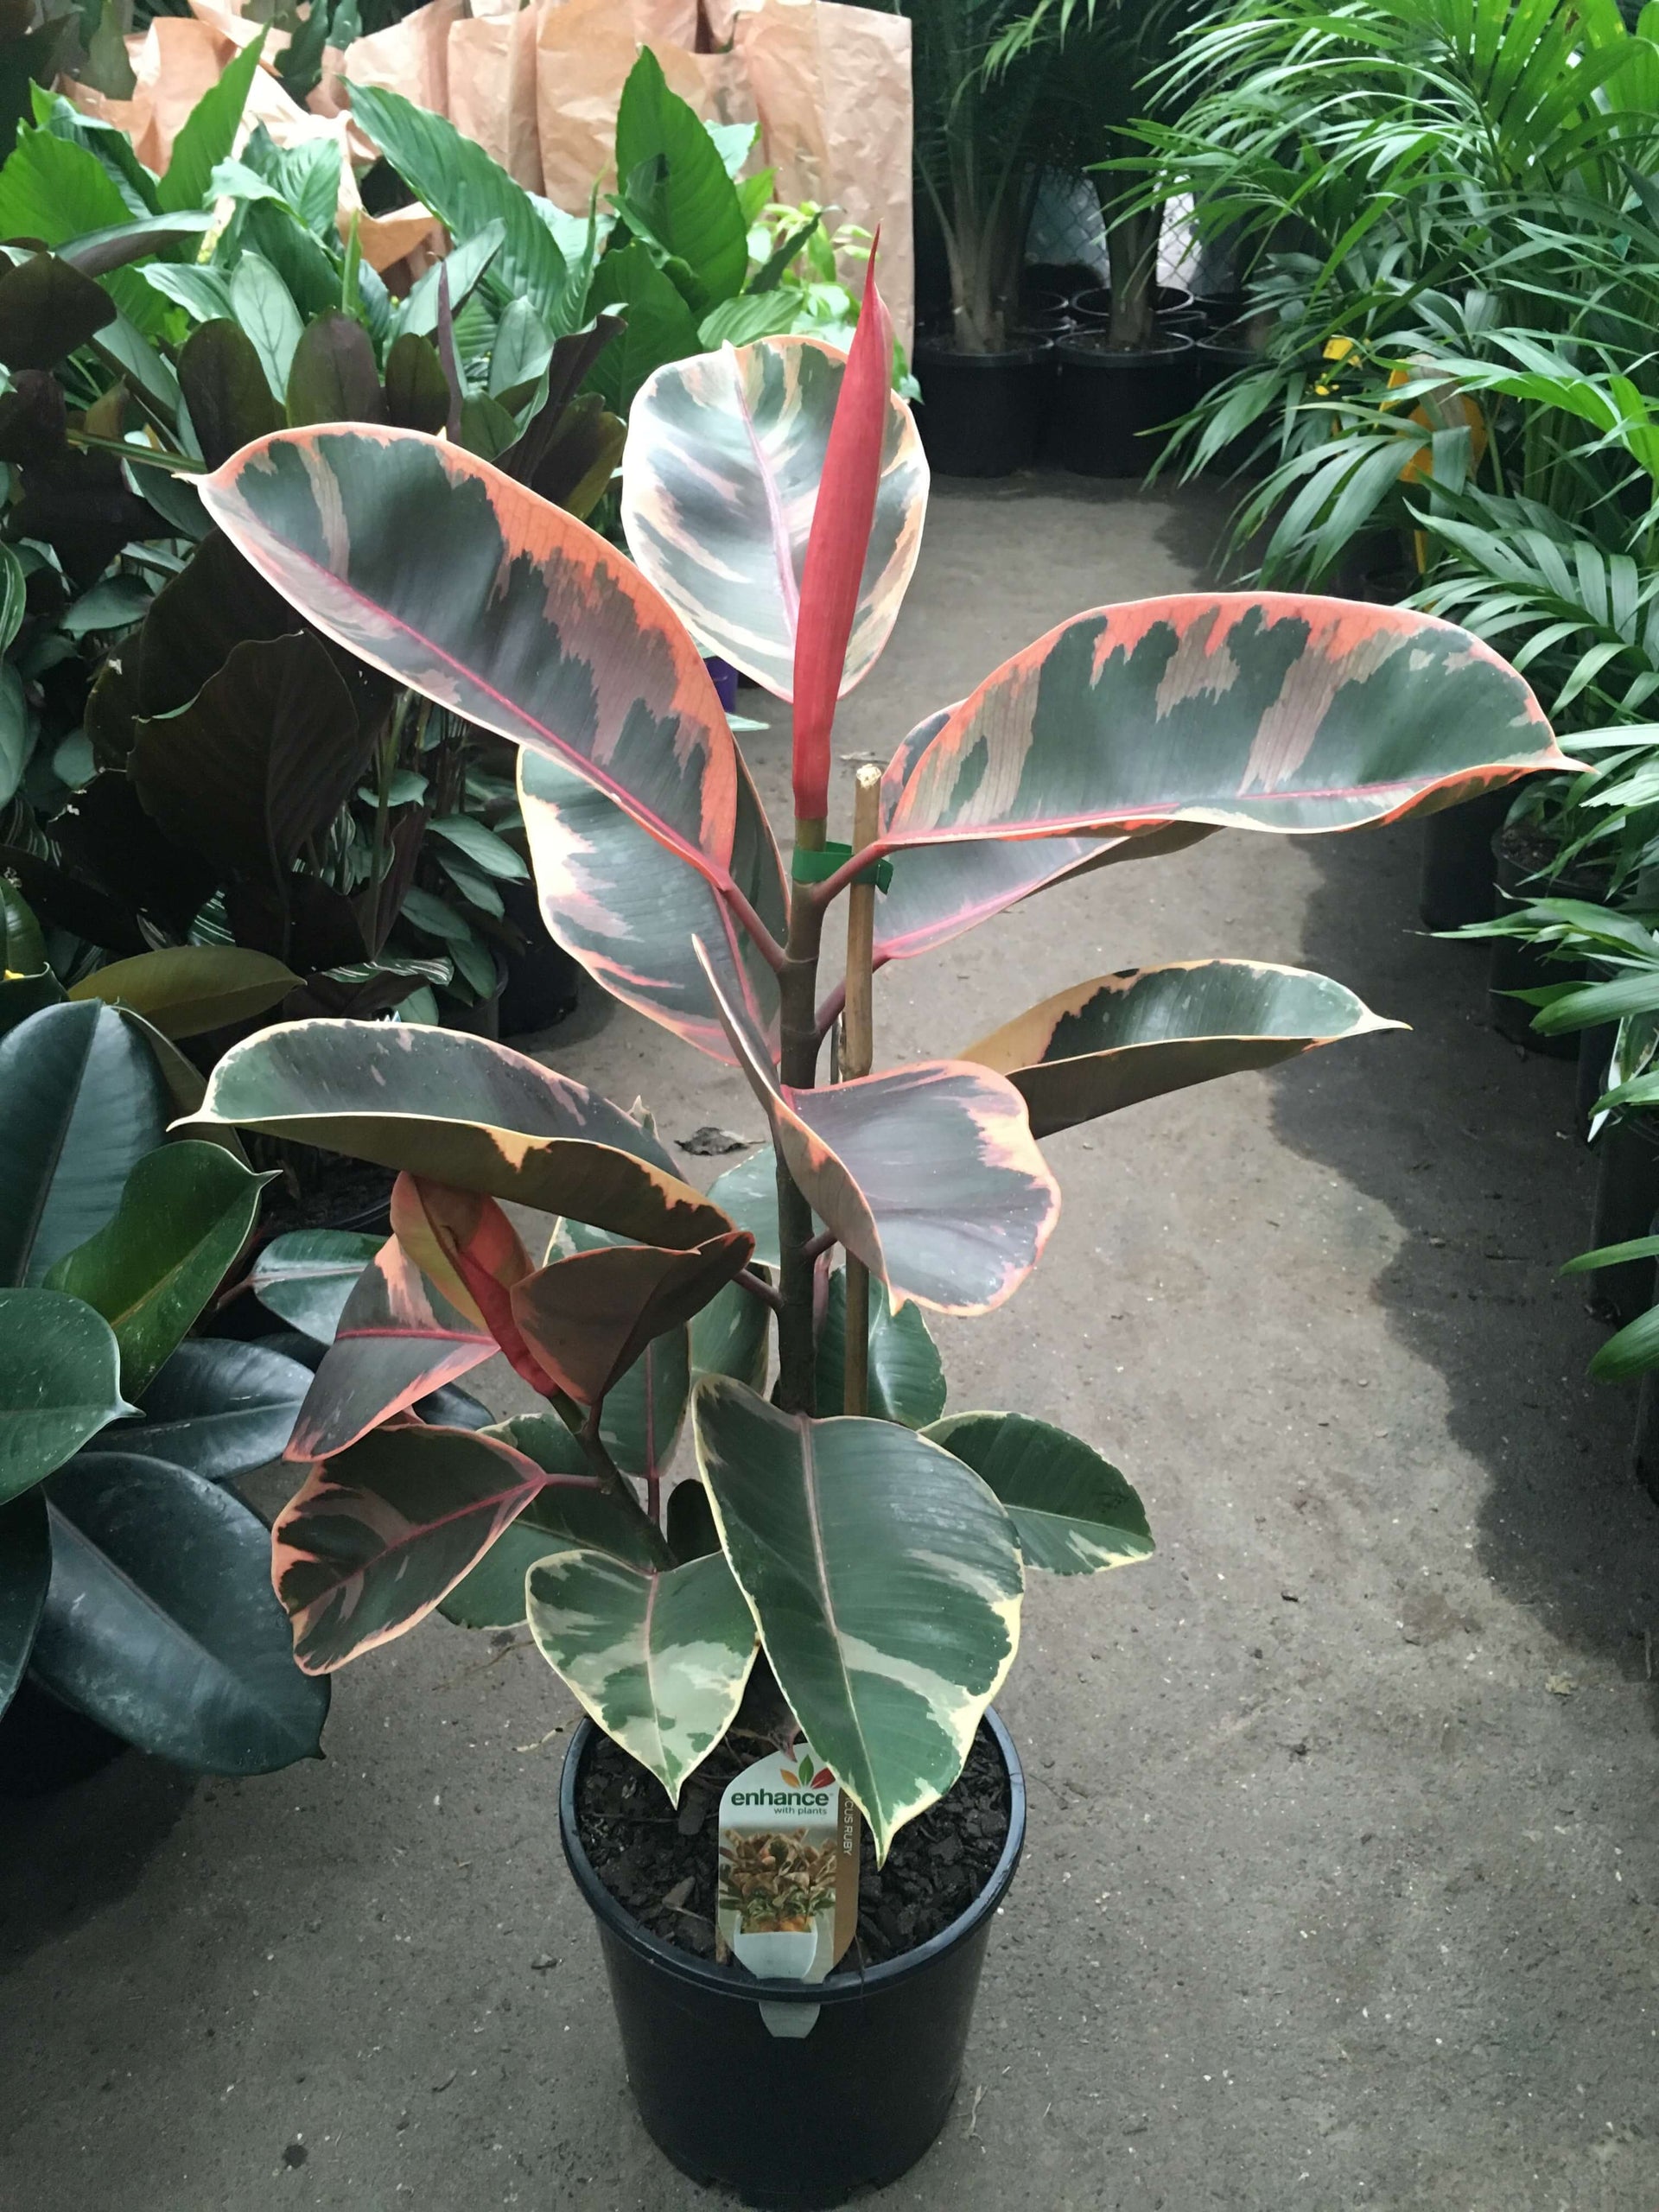 Pink Rubber Plant